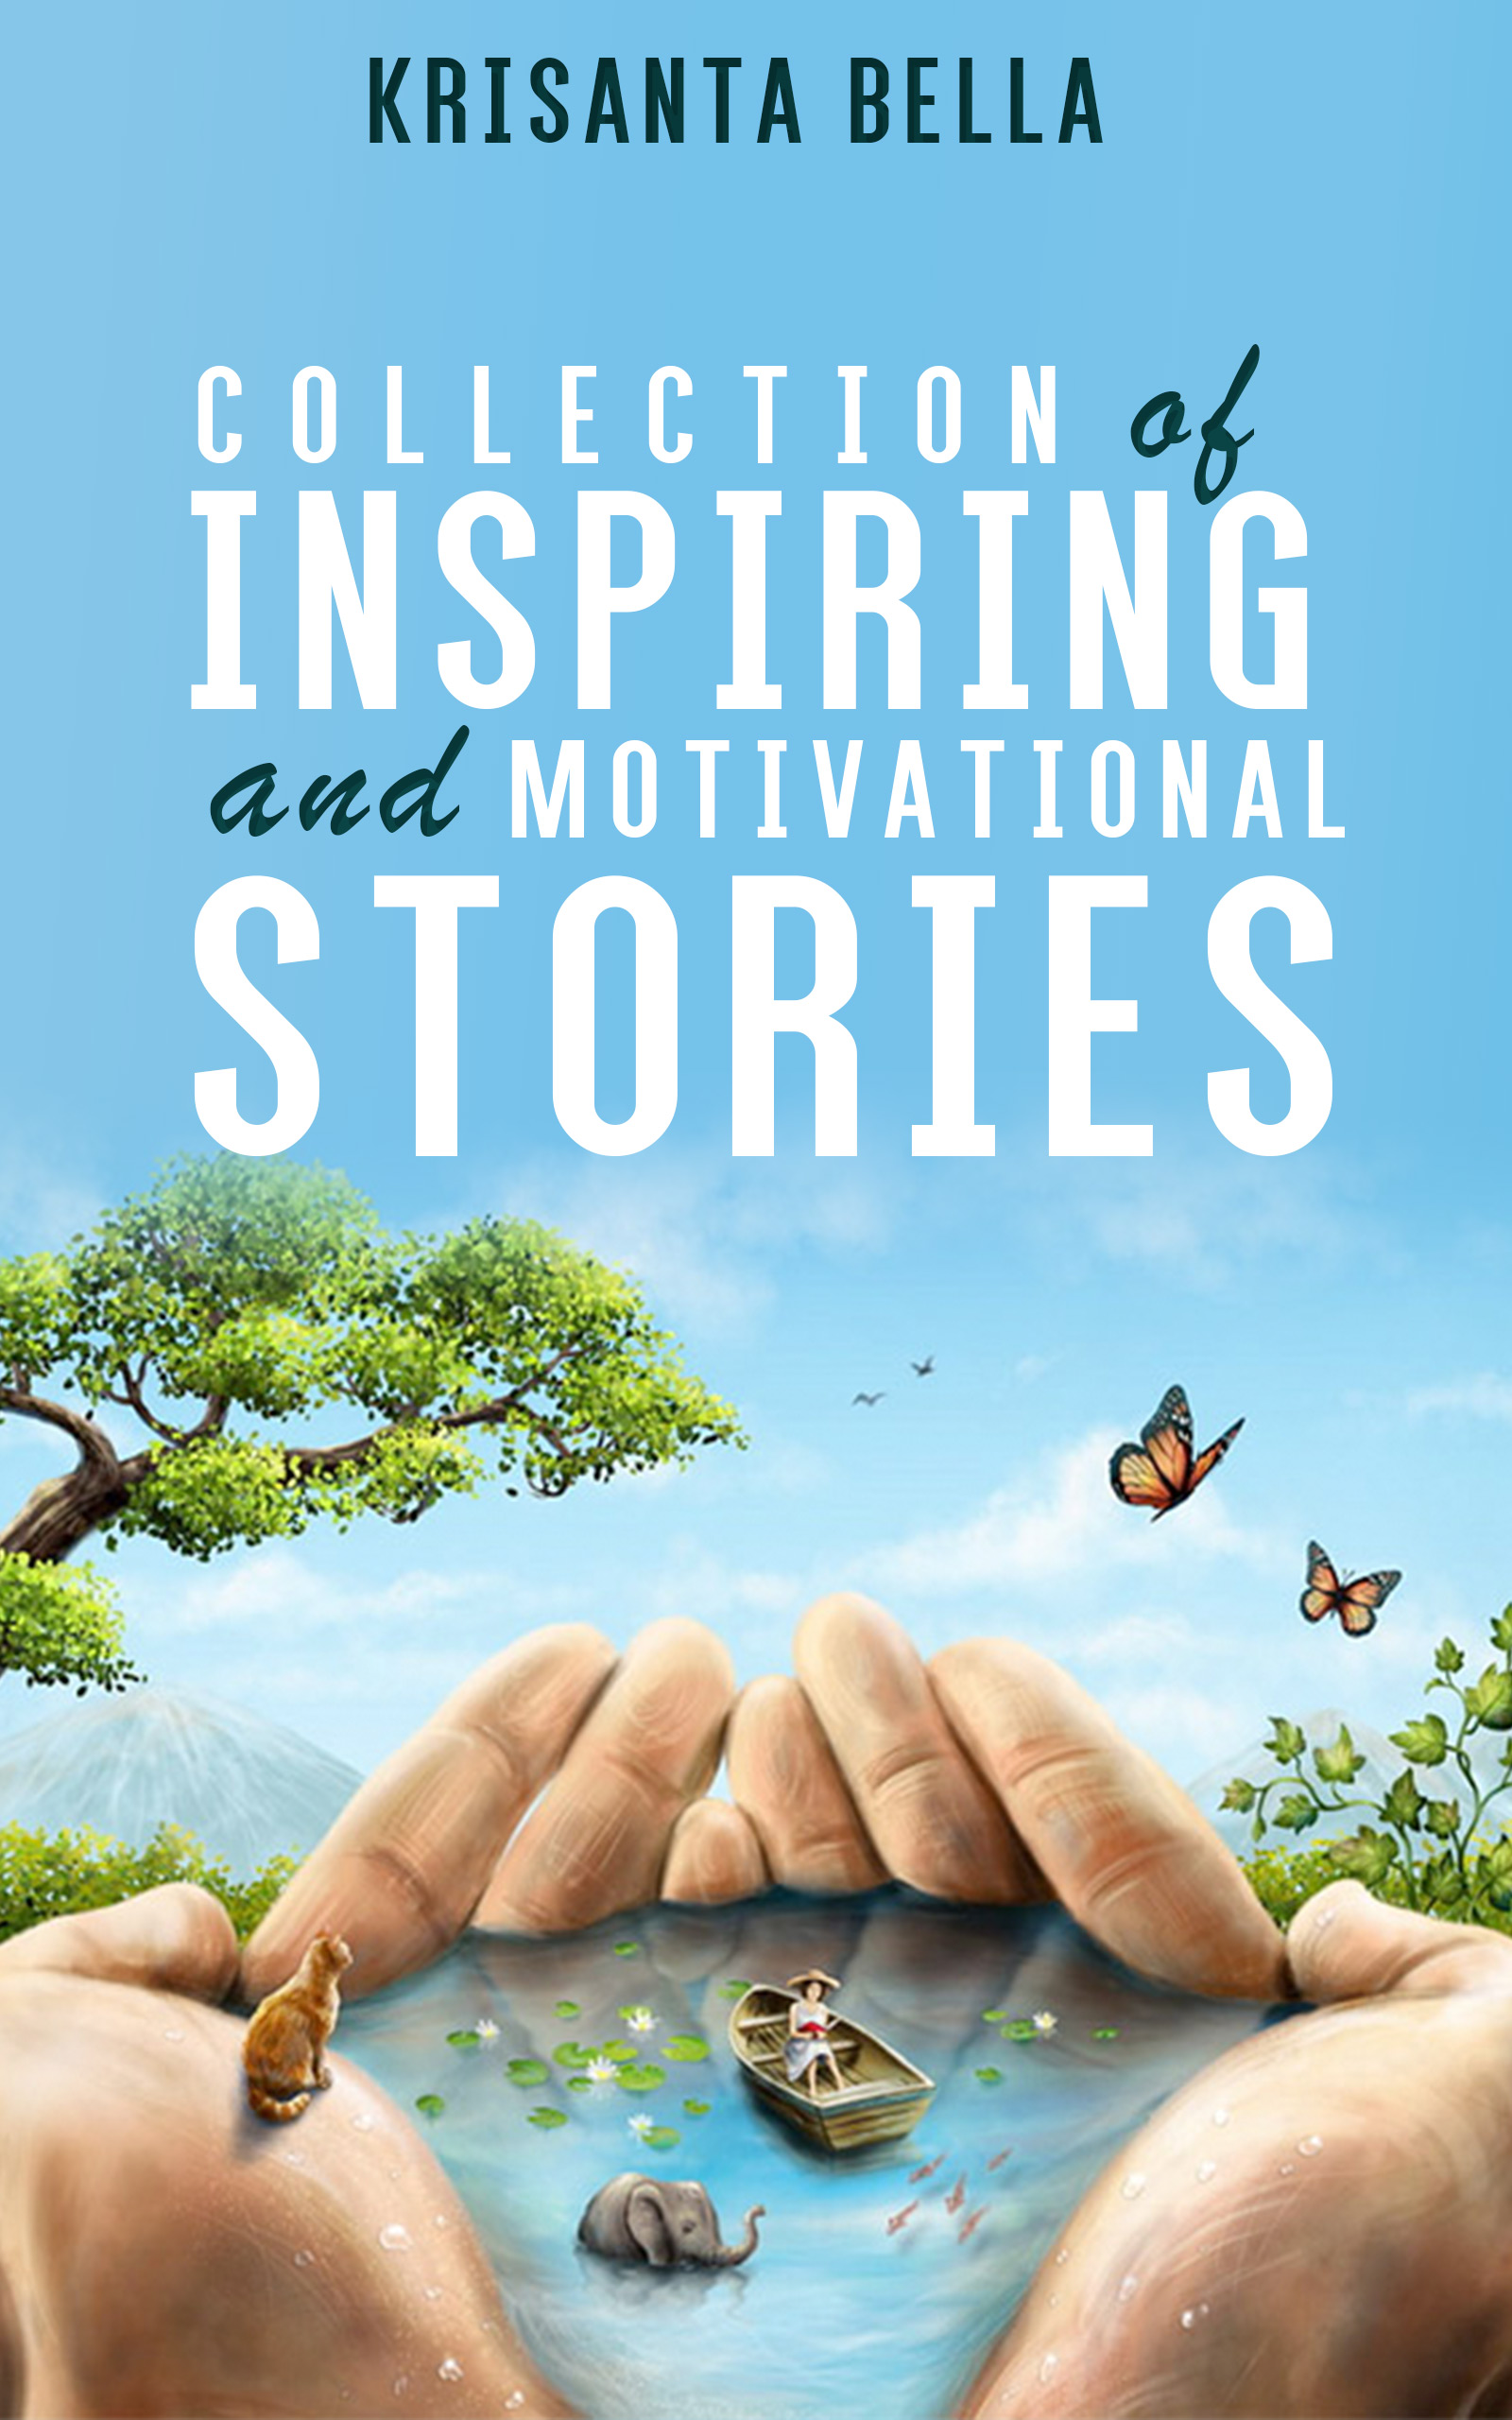 FREE: INSPIRATIONAL STORIES : Collection of Inspiring and Motivational Stories by Krisanta Bella